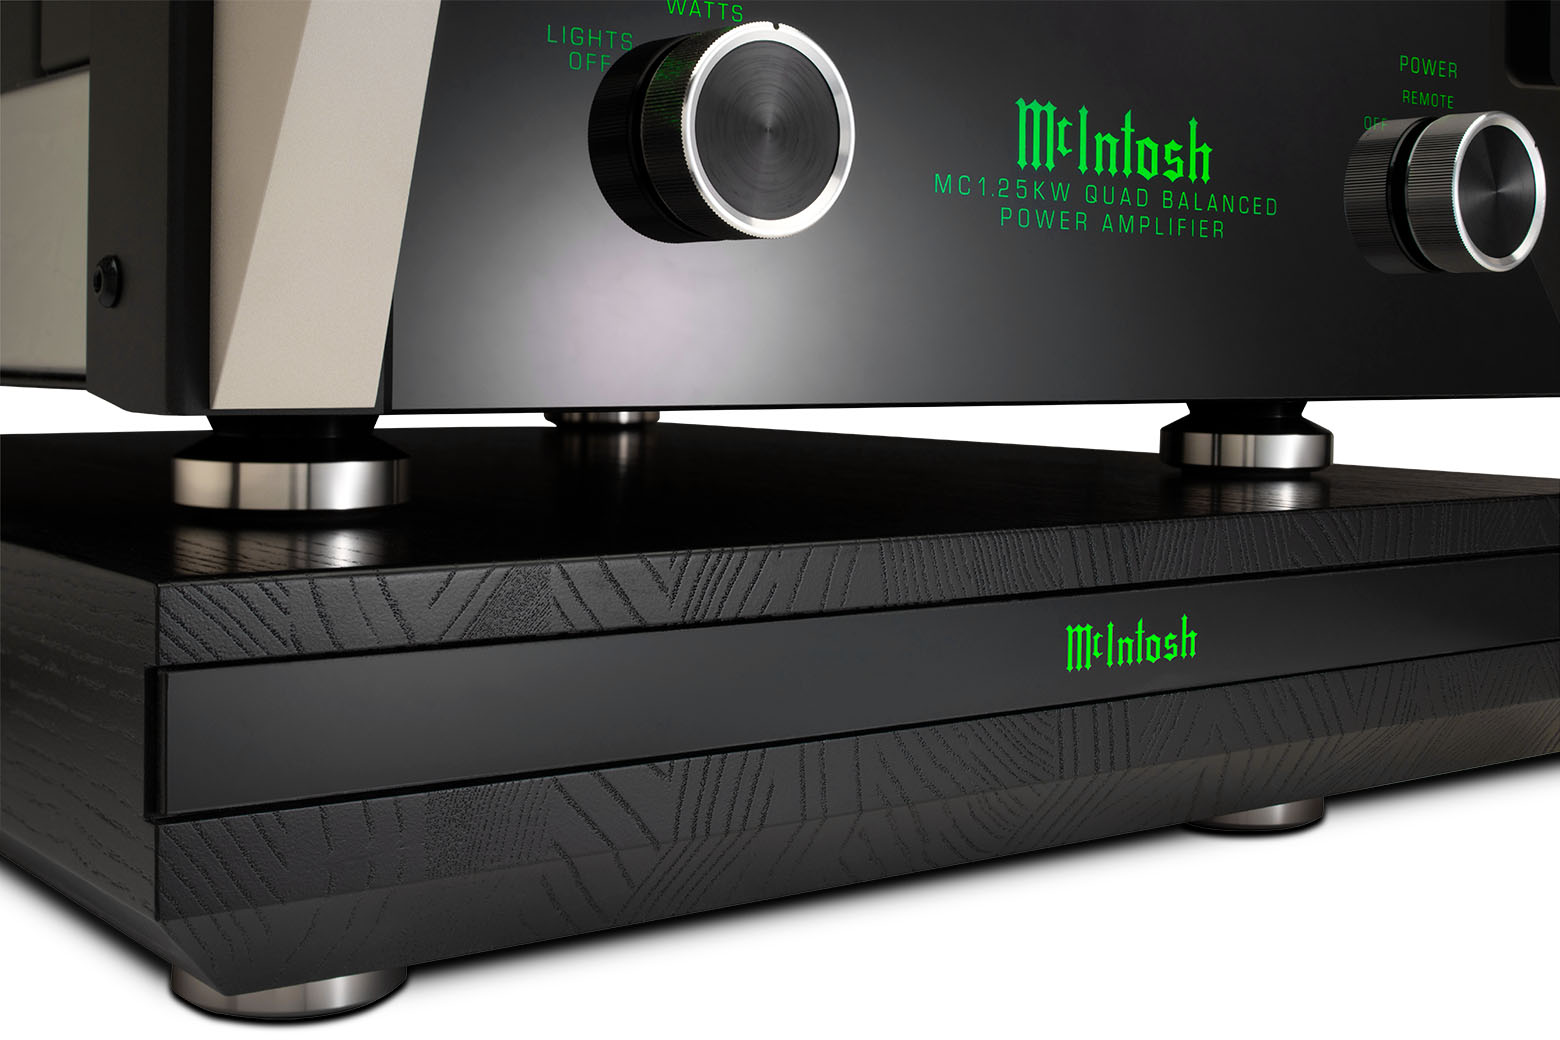 McIntosh AS125 Amplifier Stand